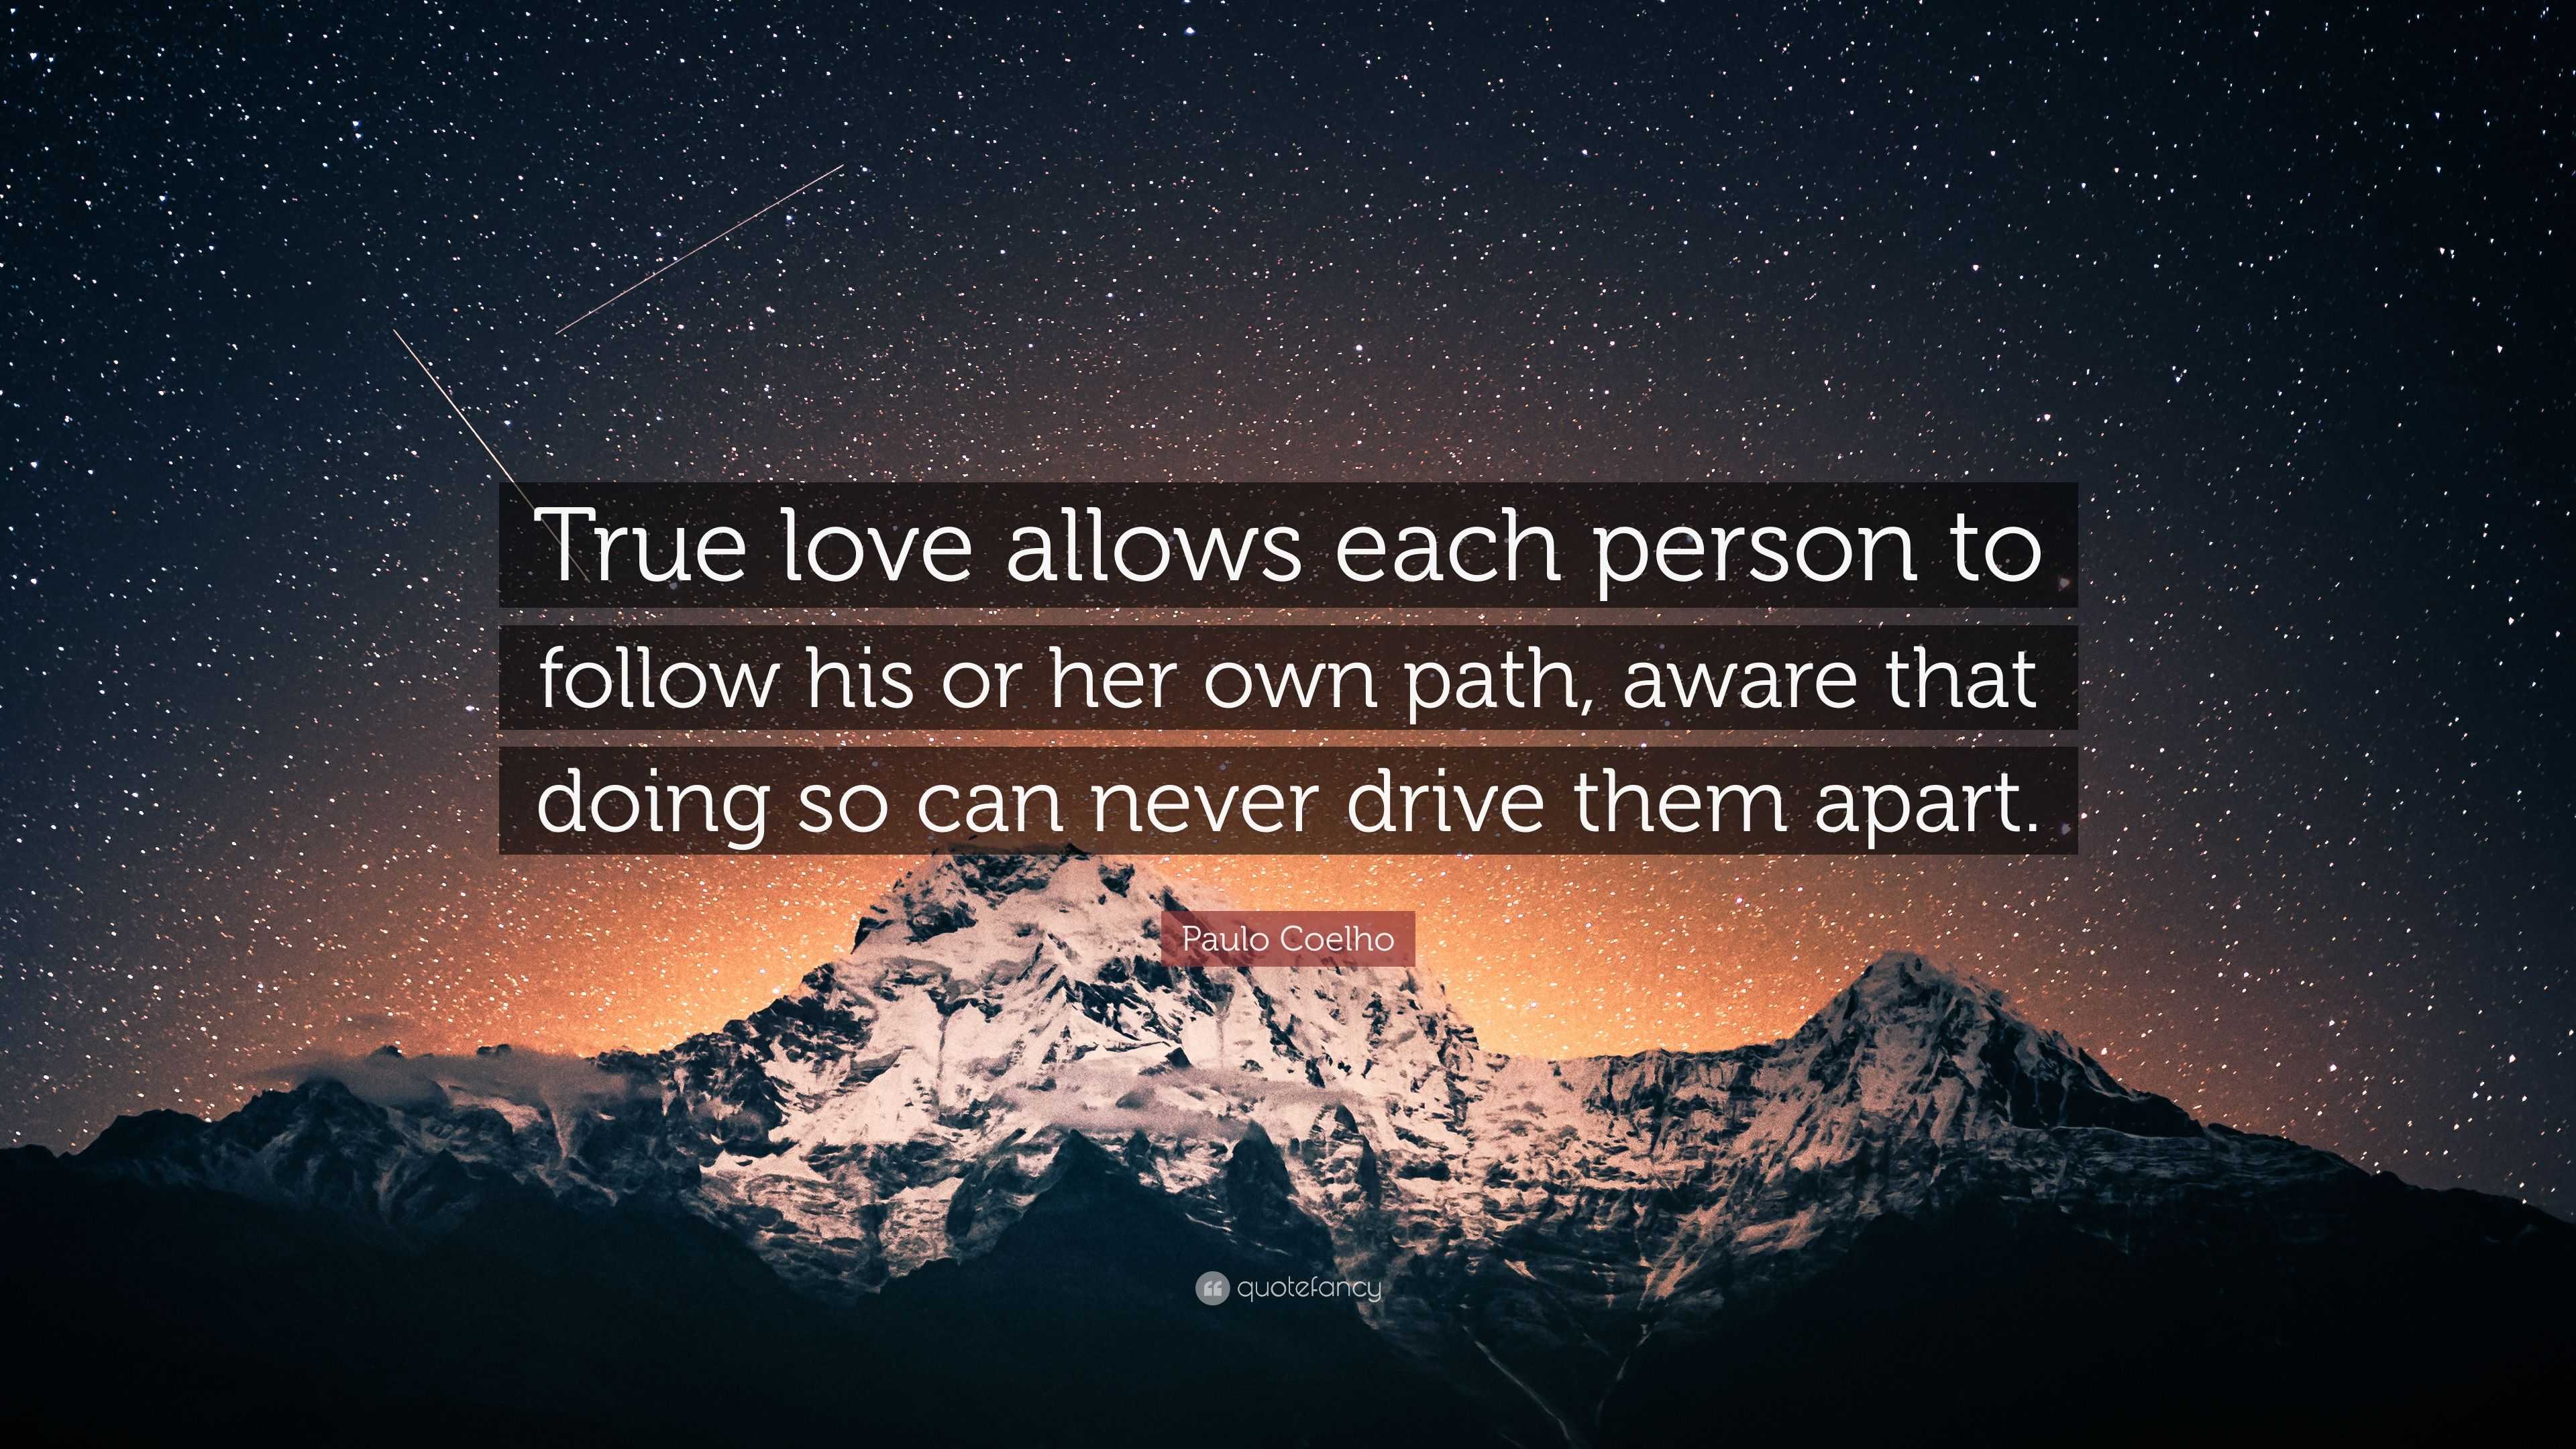 Paulo Coelho Quote: “True love allows each person to follow his or her